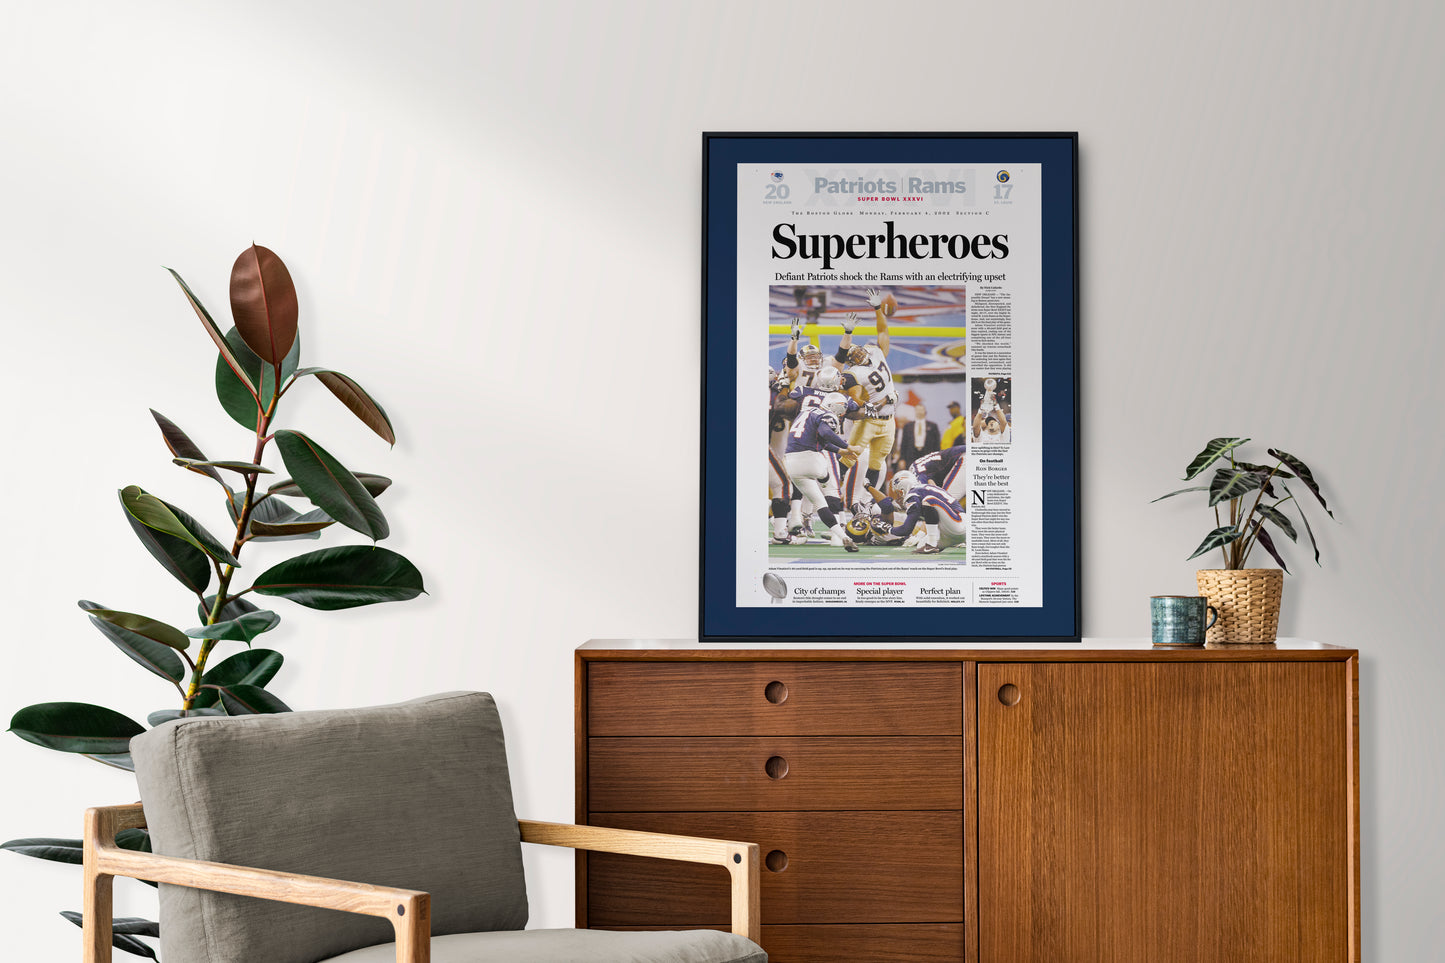 New England Patriots 2002 Super Bowl NFL Champions Front Cover The Boston Globe Newspaper Poster